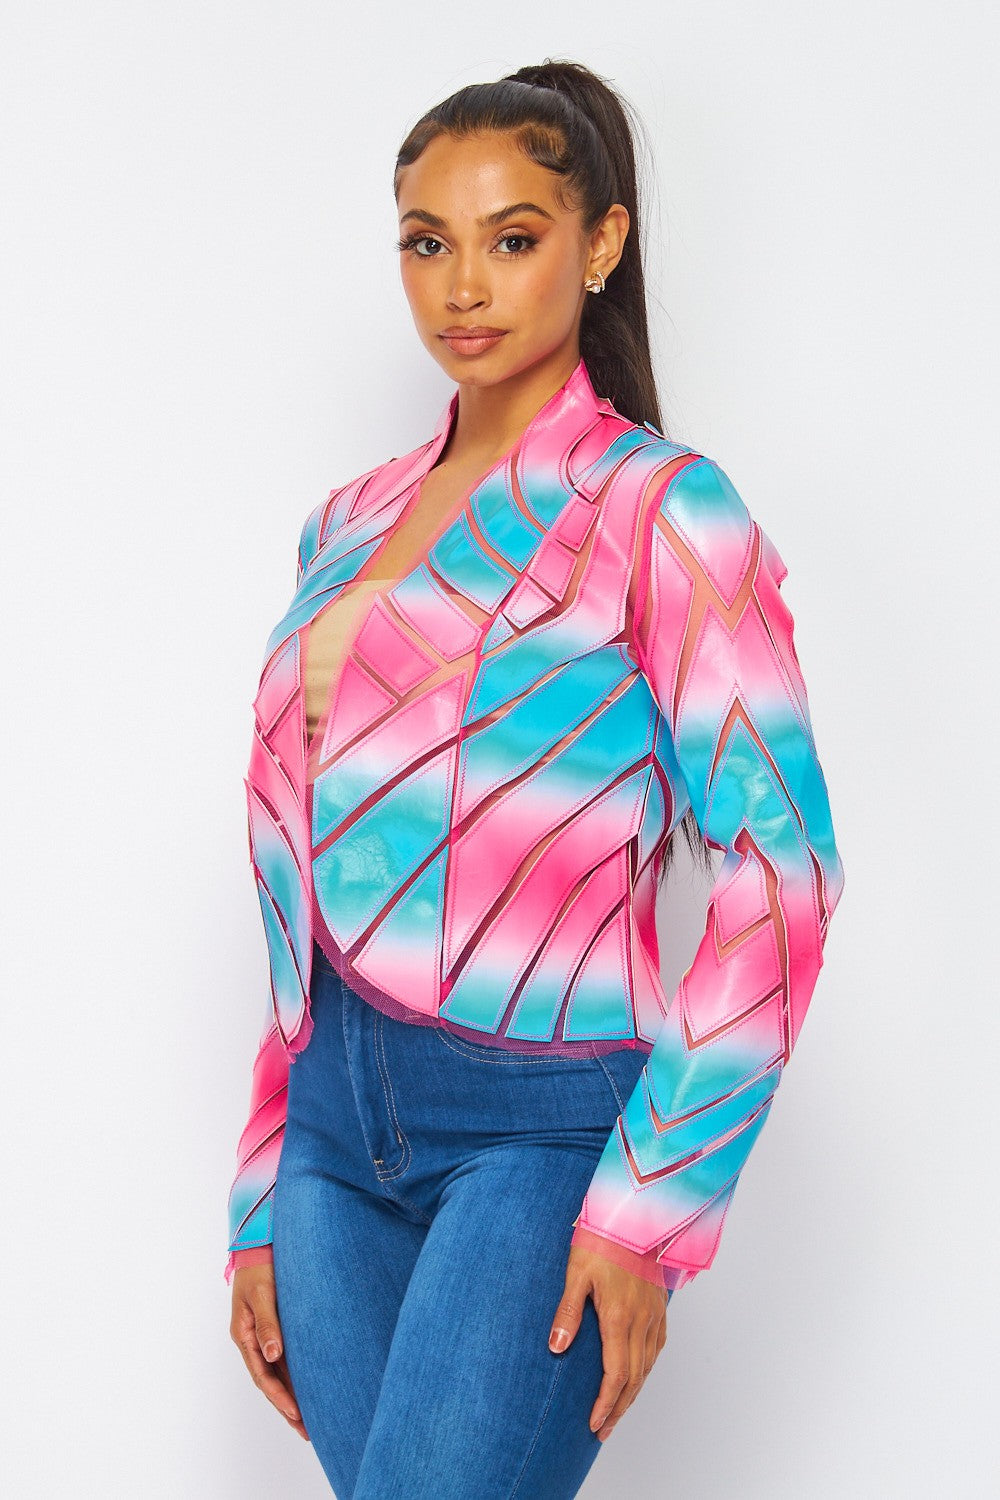 On Purpose Tie Dye Faux Leather Patchwork Jacket